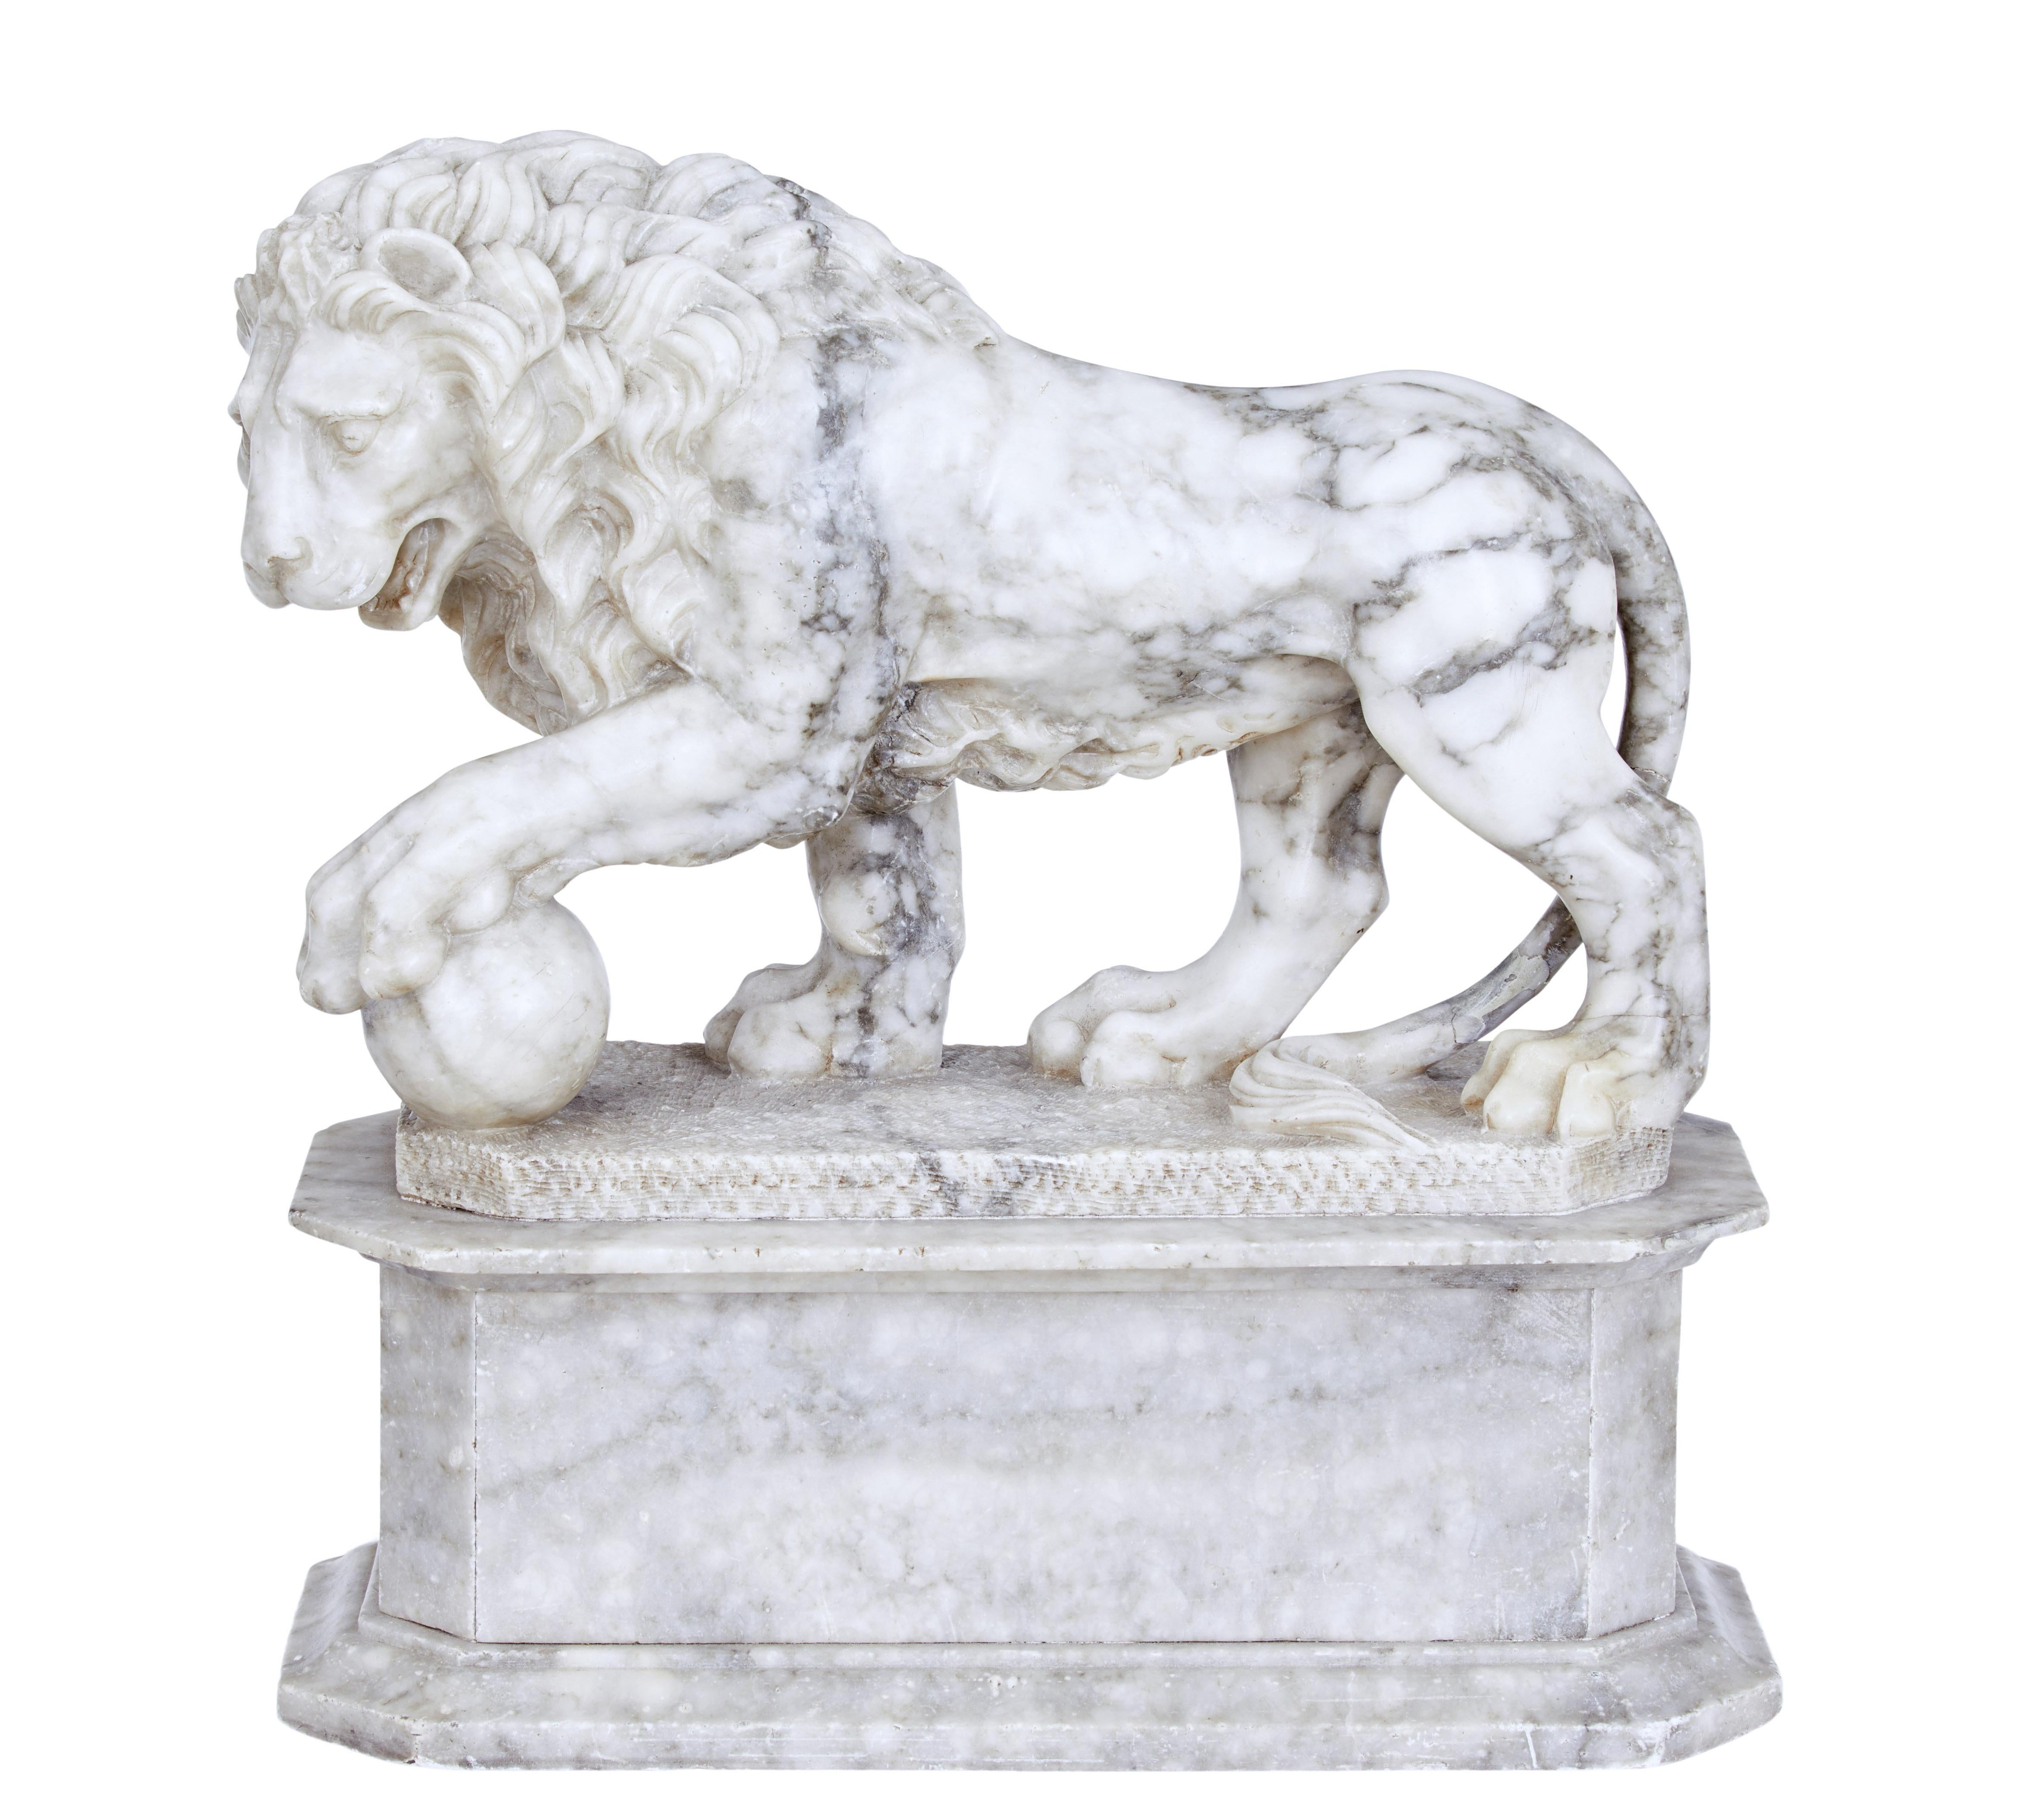 Mid-19th century Italian grand tour marble statue, circa 1860.

Fine quality white marble with grey veining carved lion with 1 foot on a ball. The lion is in a standing position with the ball re-presenting the world.

Standing on an